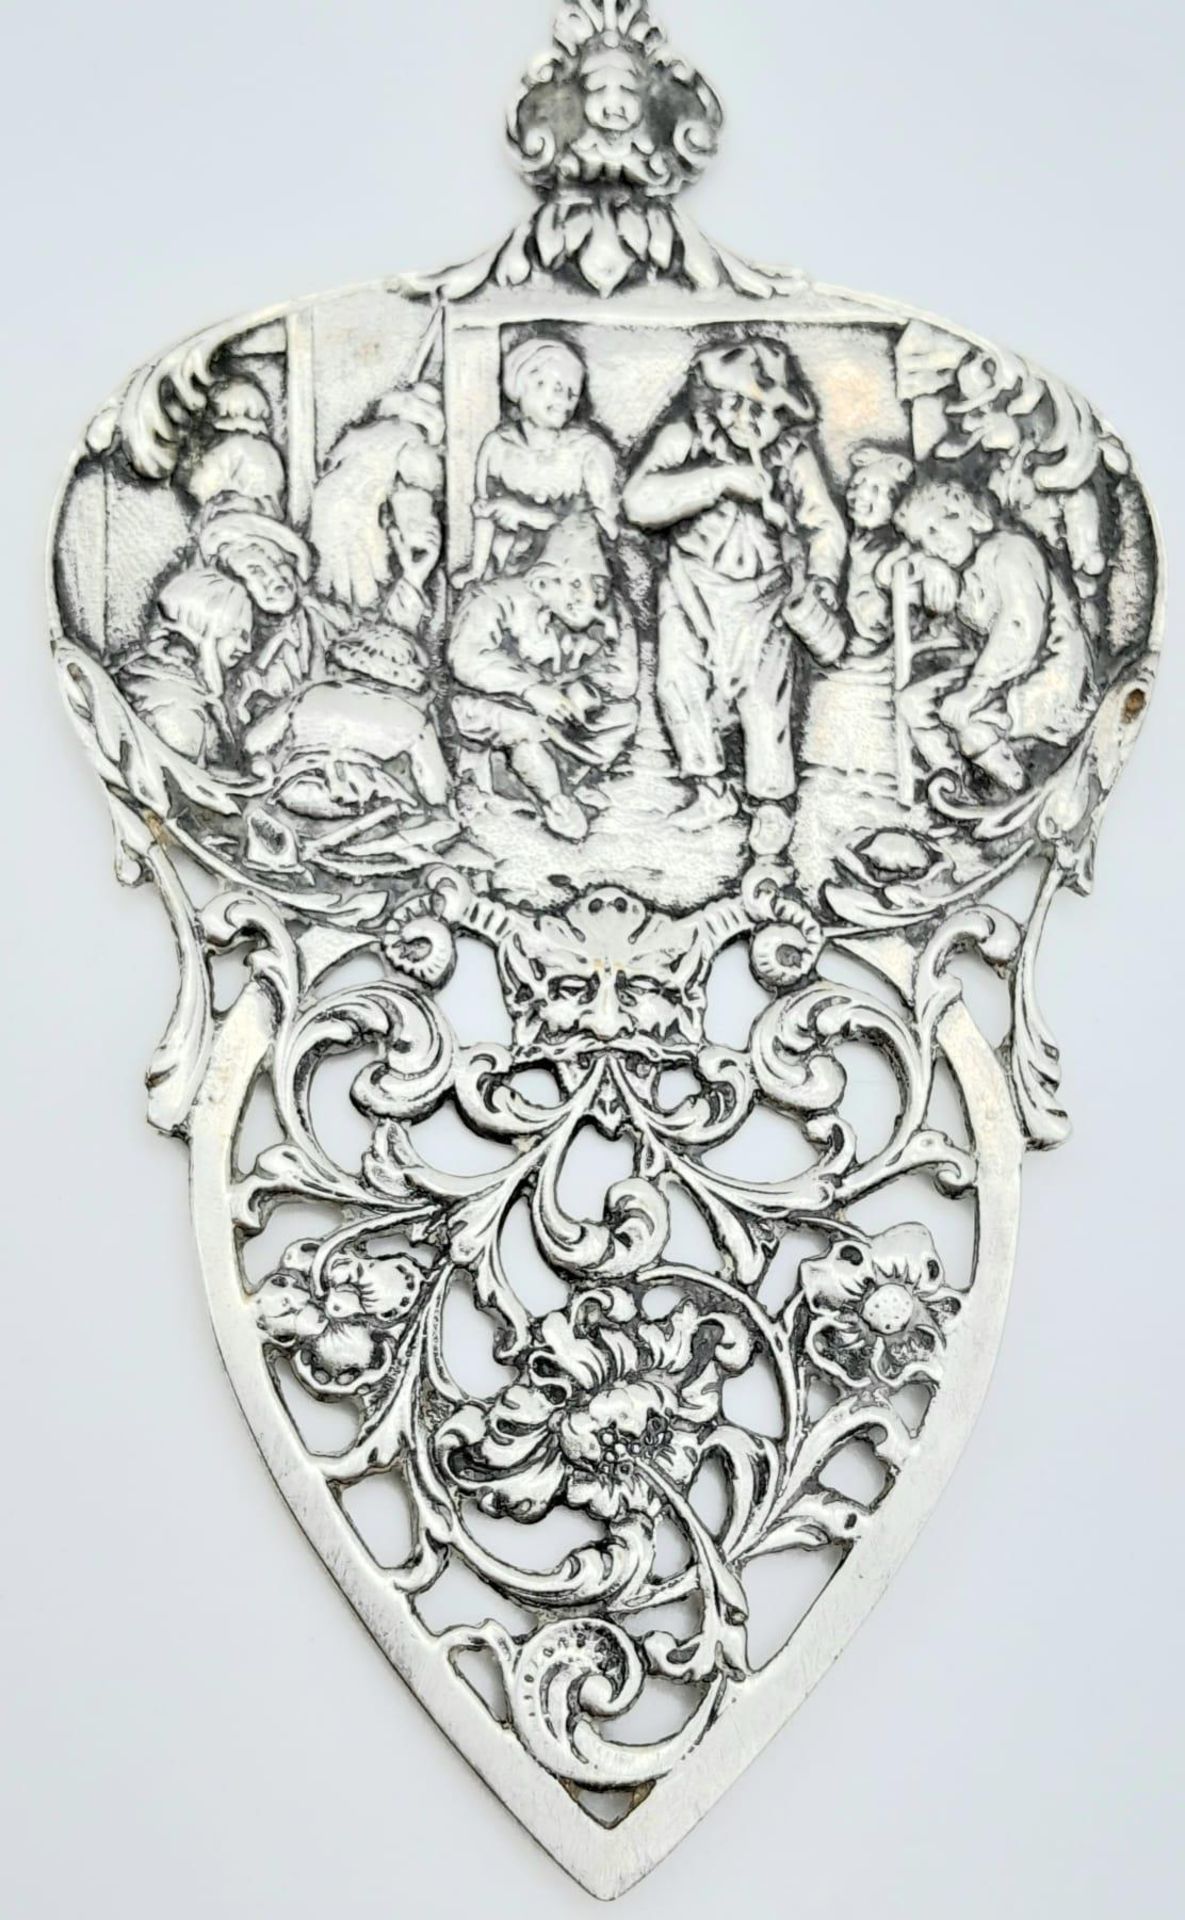 An Art Deco Dutch Ornate Silver Cake Serving Utensil. Repoussé and chased decorative nautical - Image 3 of 4